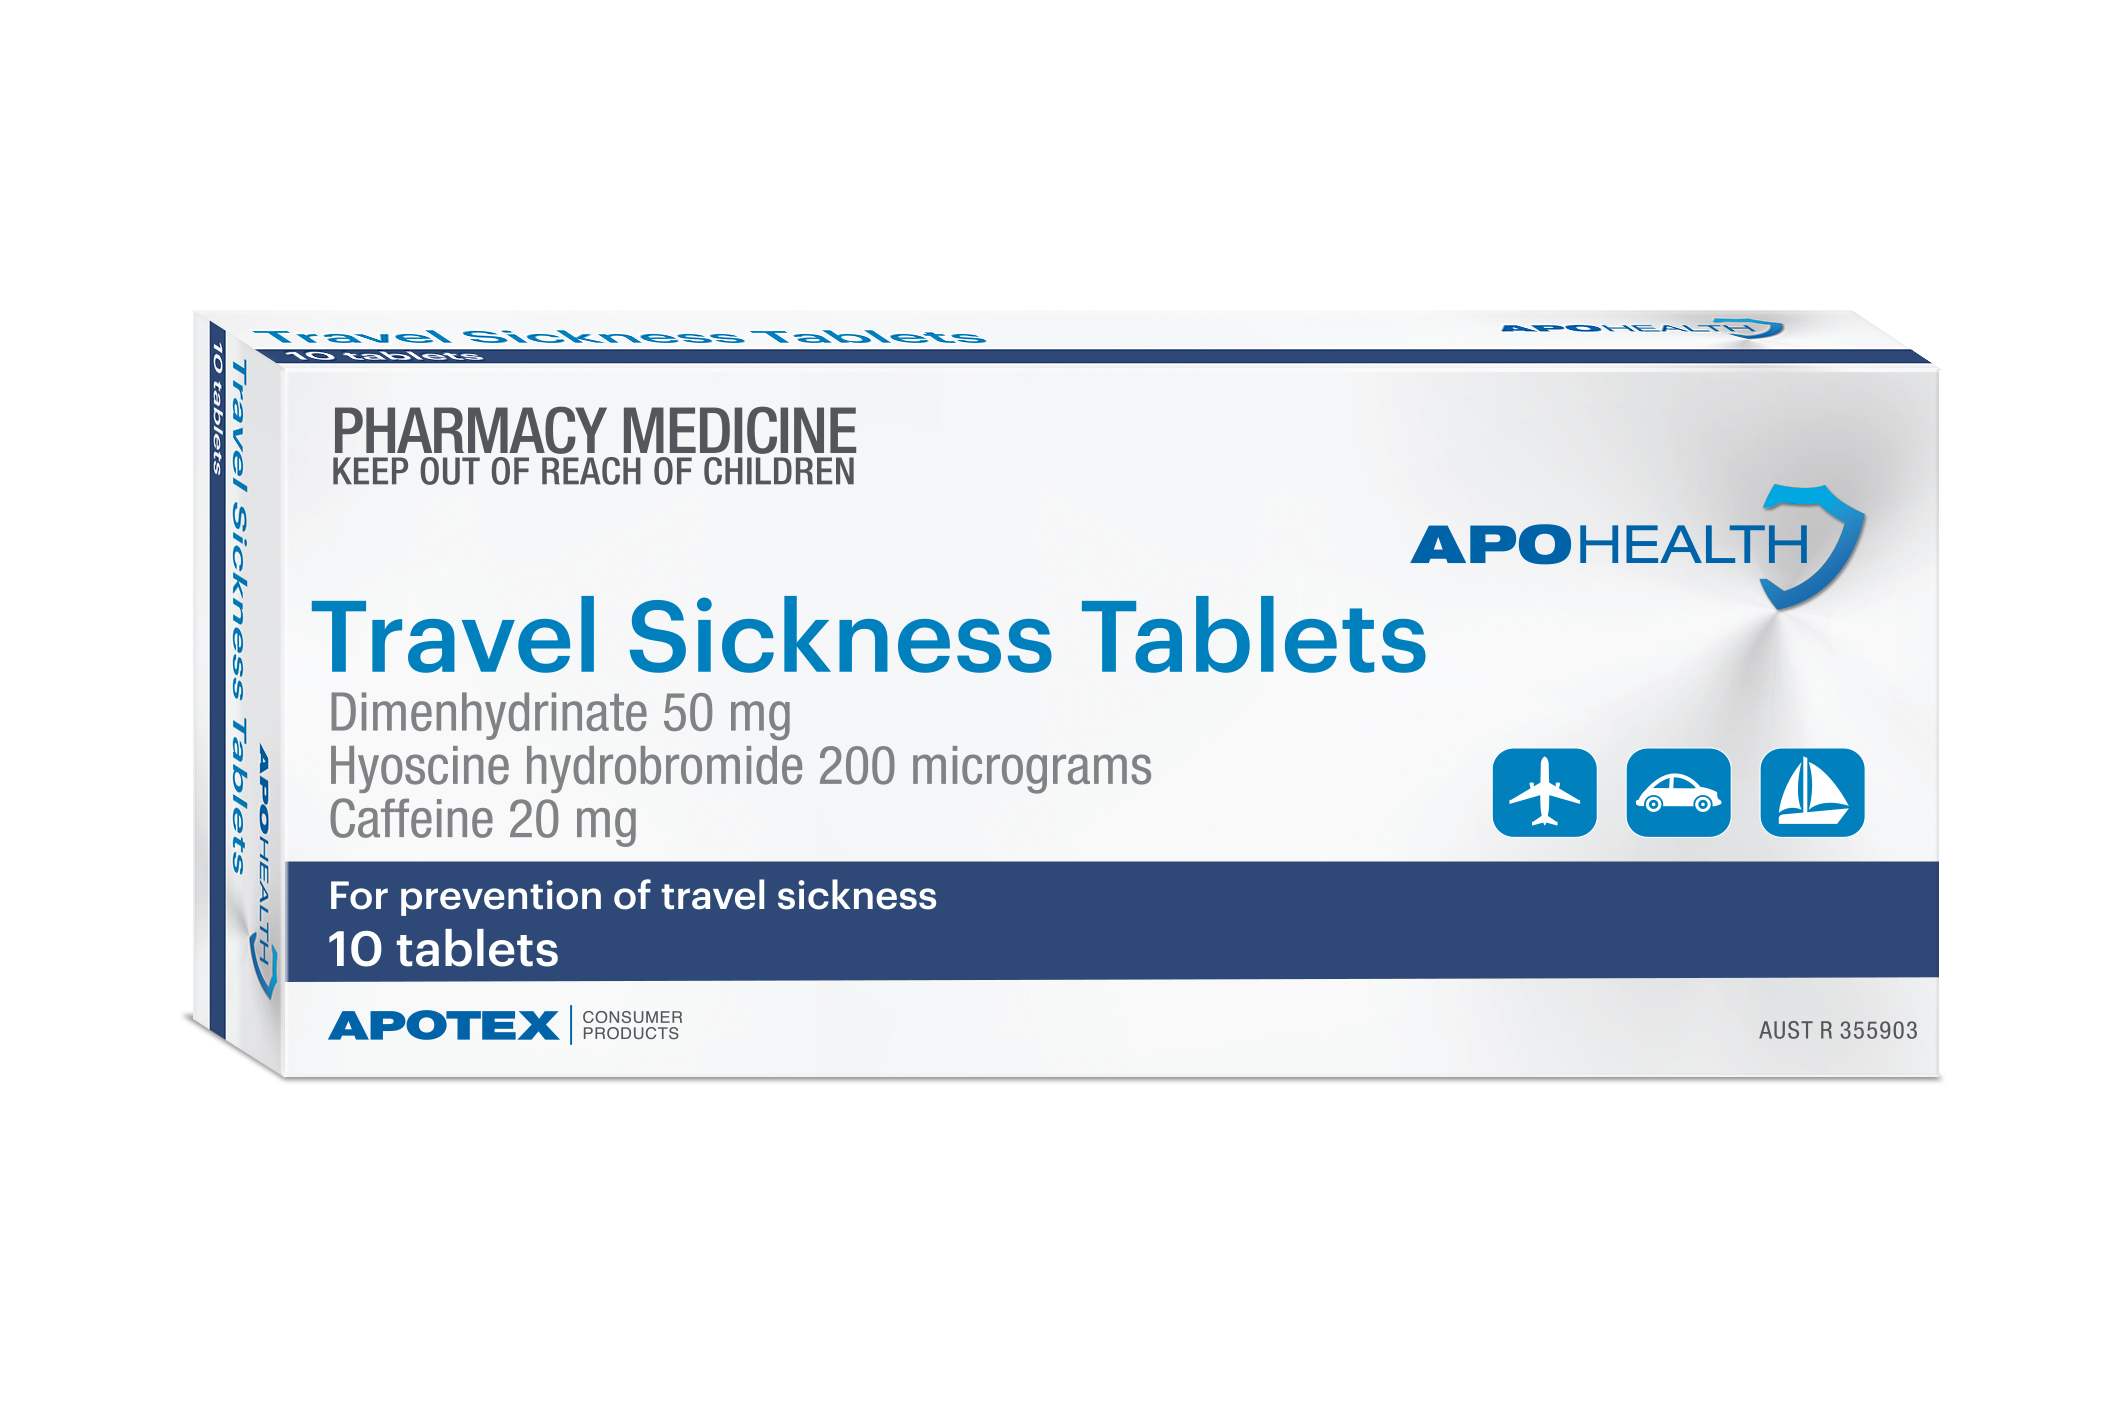 do travel sickness tablets go out of date